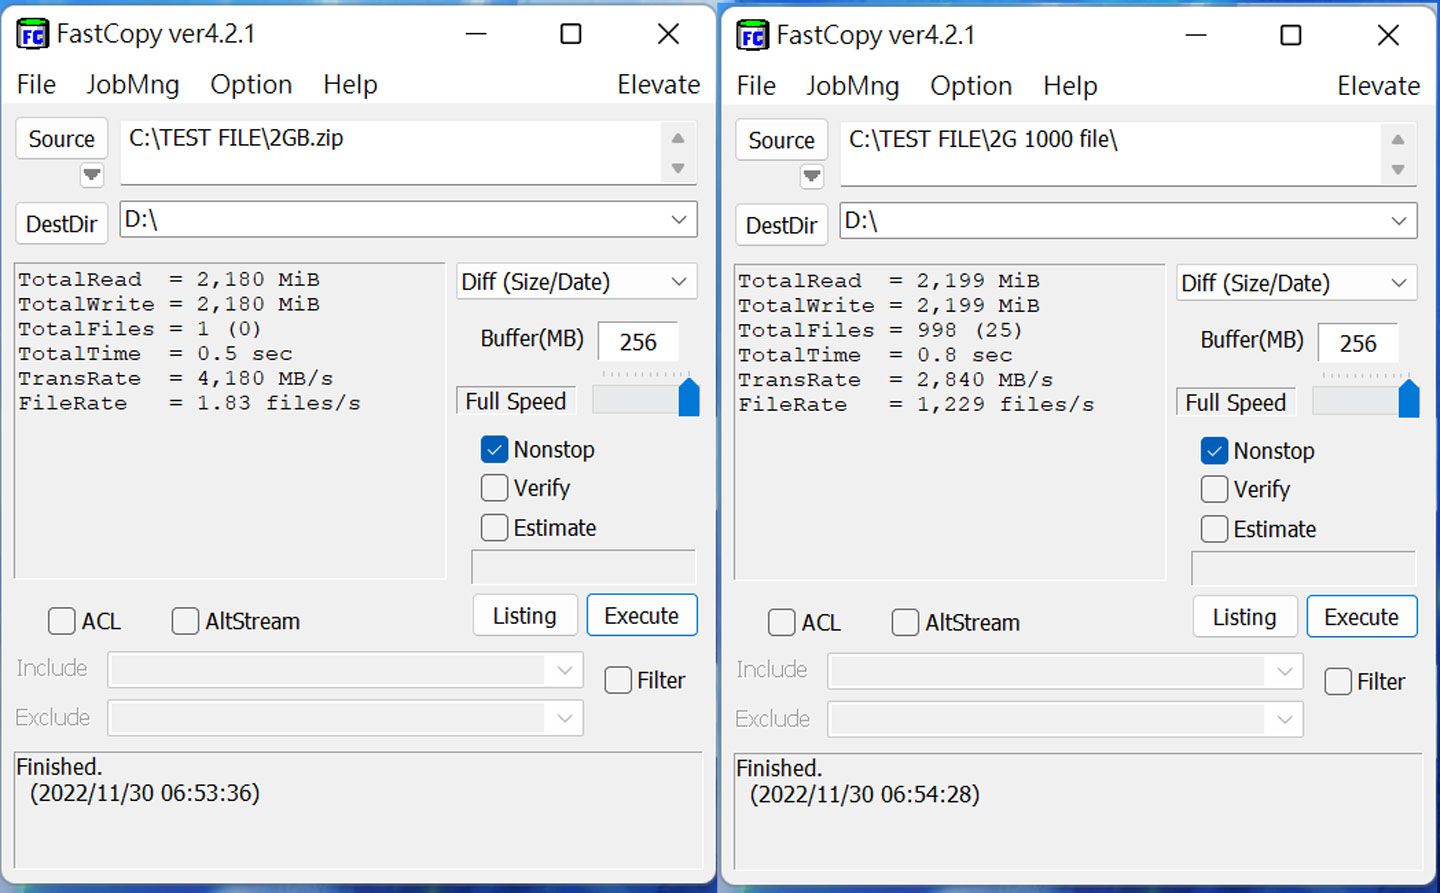 Using FastCopy to measure the actual file transfer performance of SOLIDIGM P44 Pro, the measured transfer speed is 4,180 MB/s for a 2GB single file, and 2,840 MB/s for 1000 2GB files.